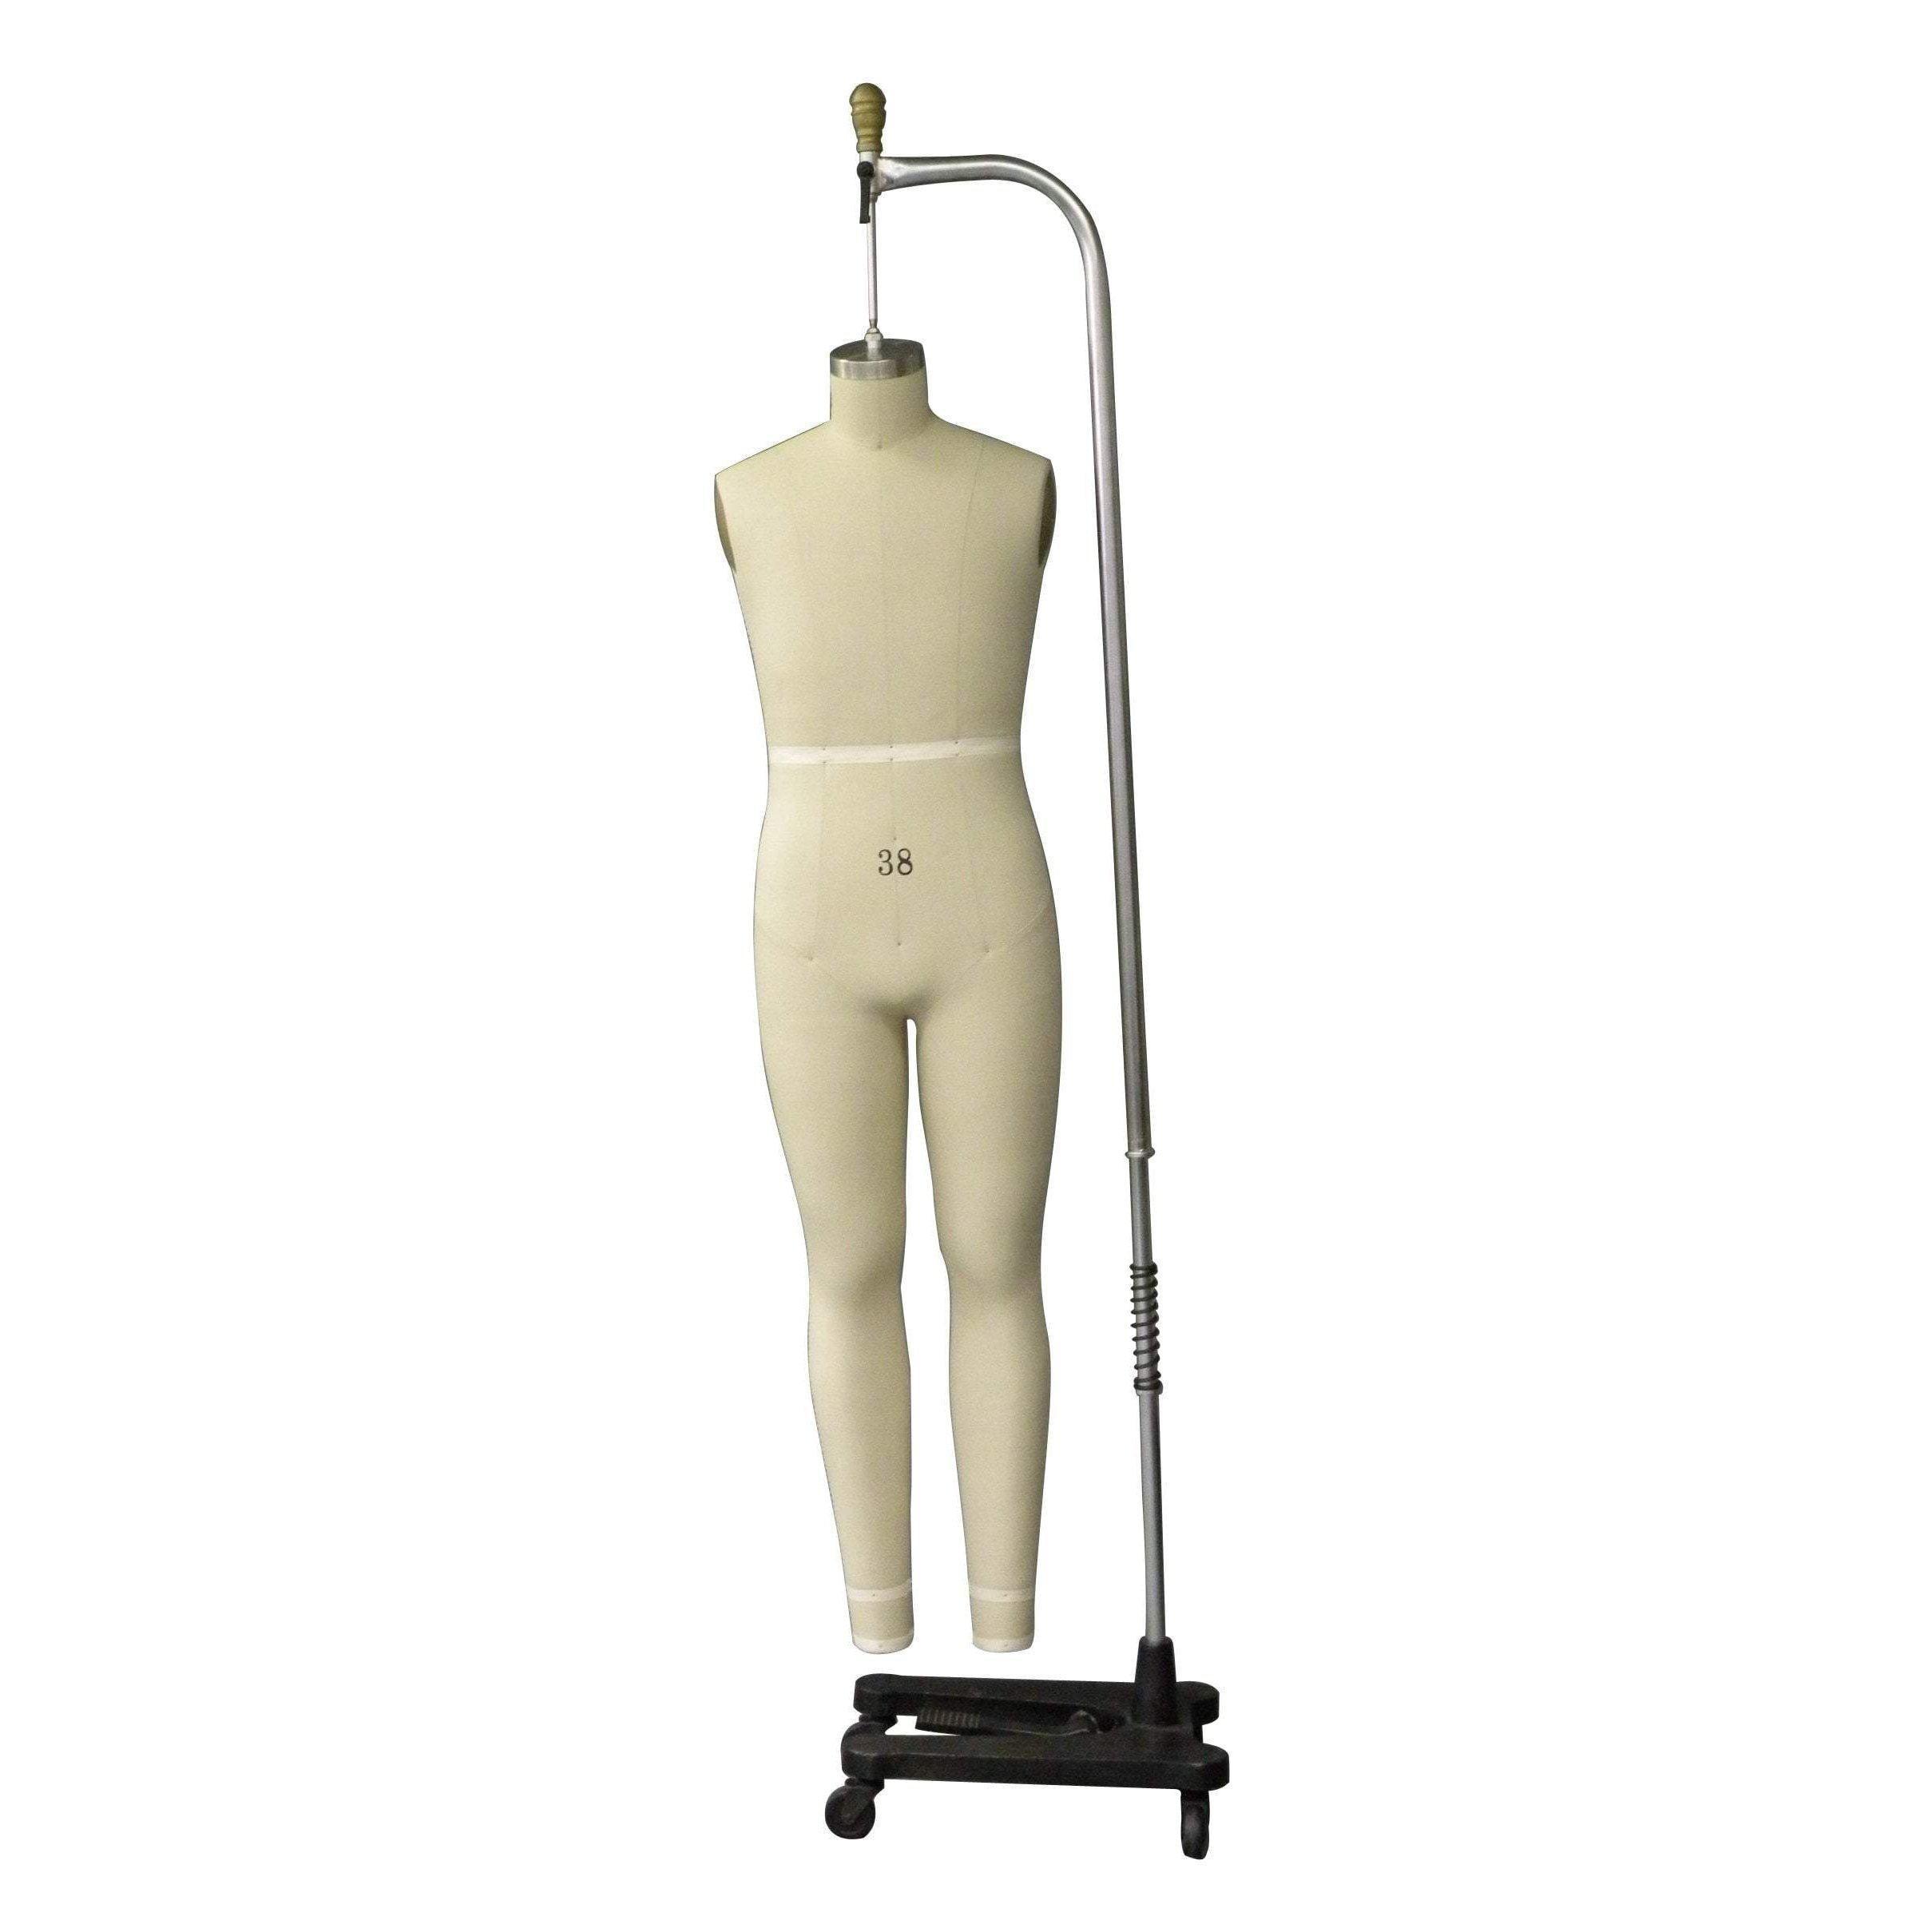 Male Full Body Professional Dress Form - Mannequin Mall